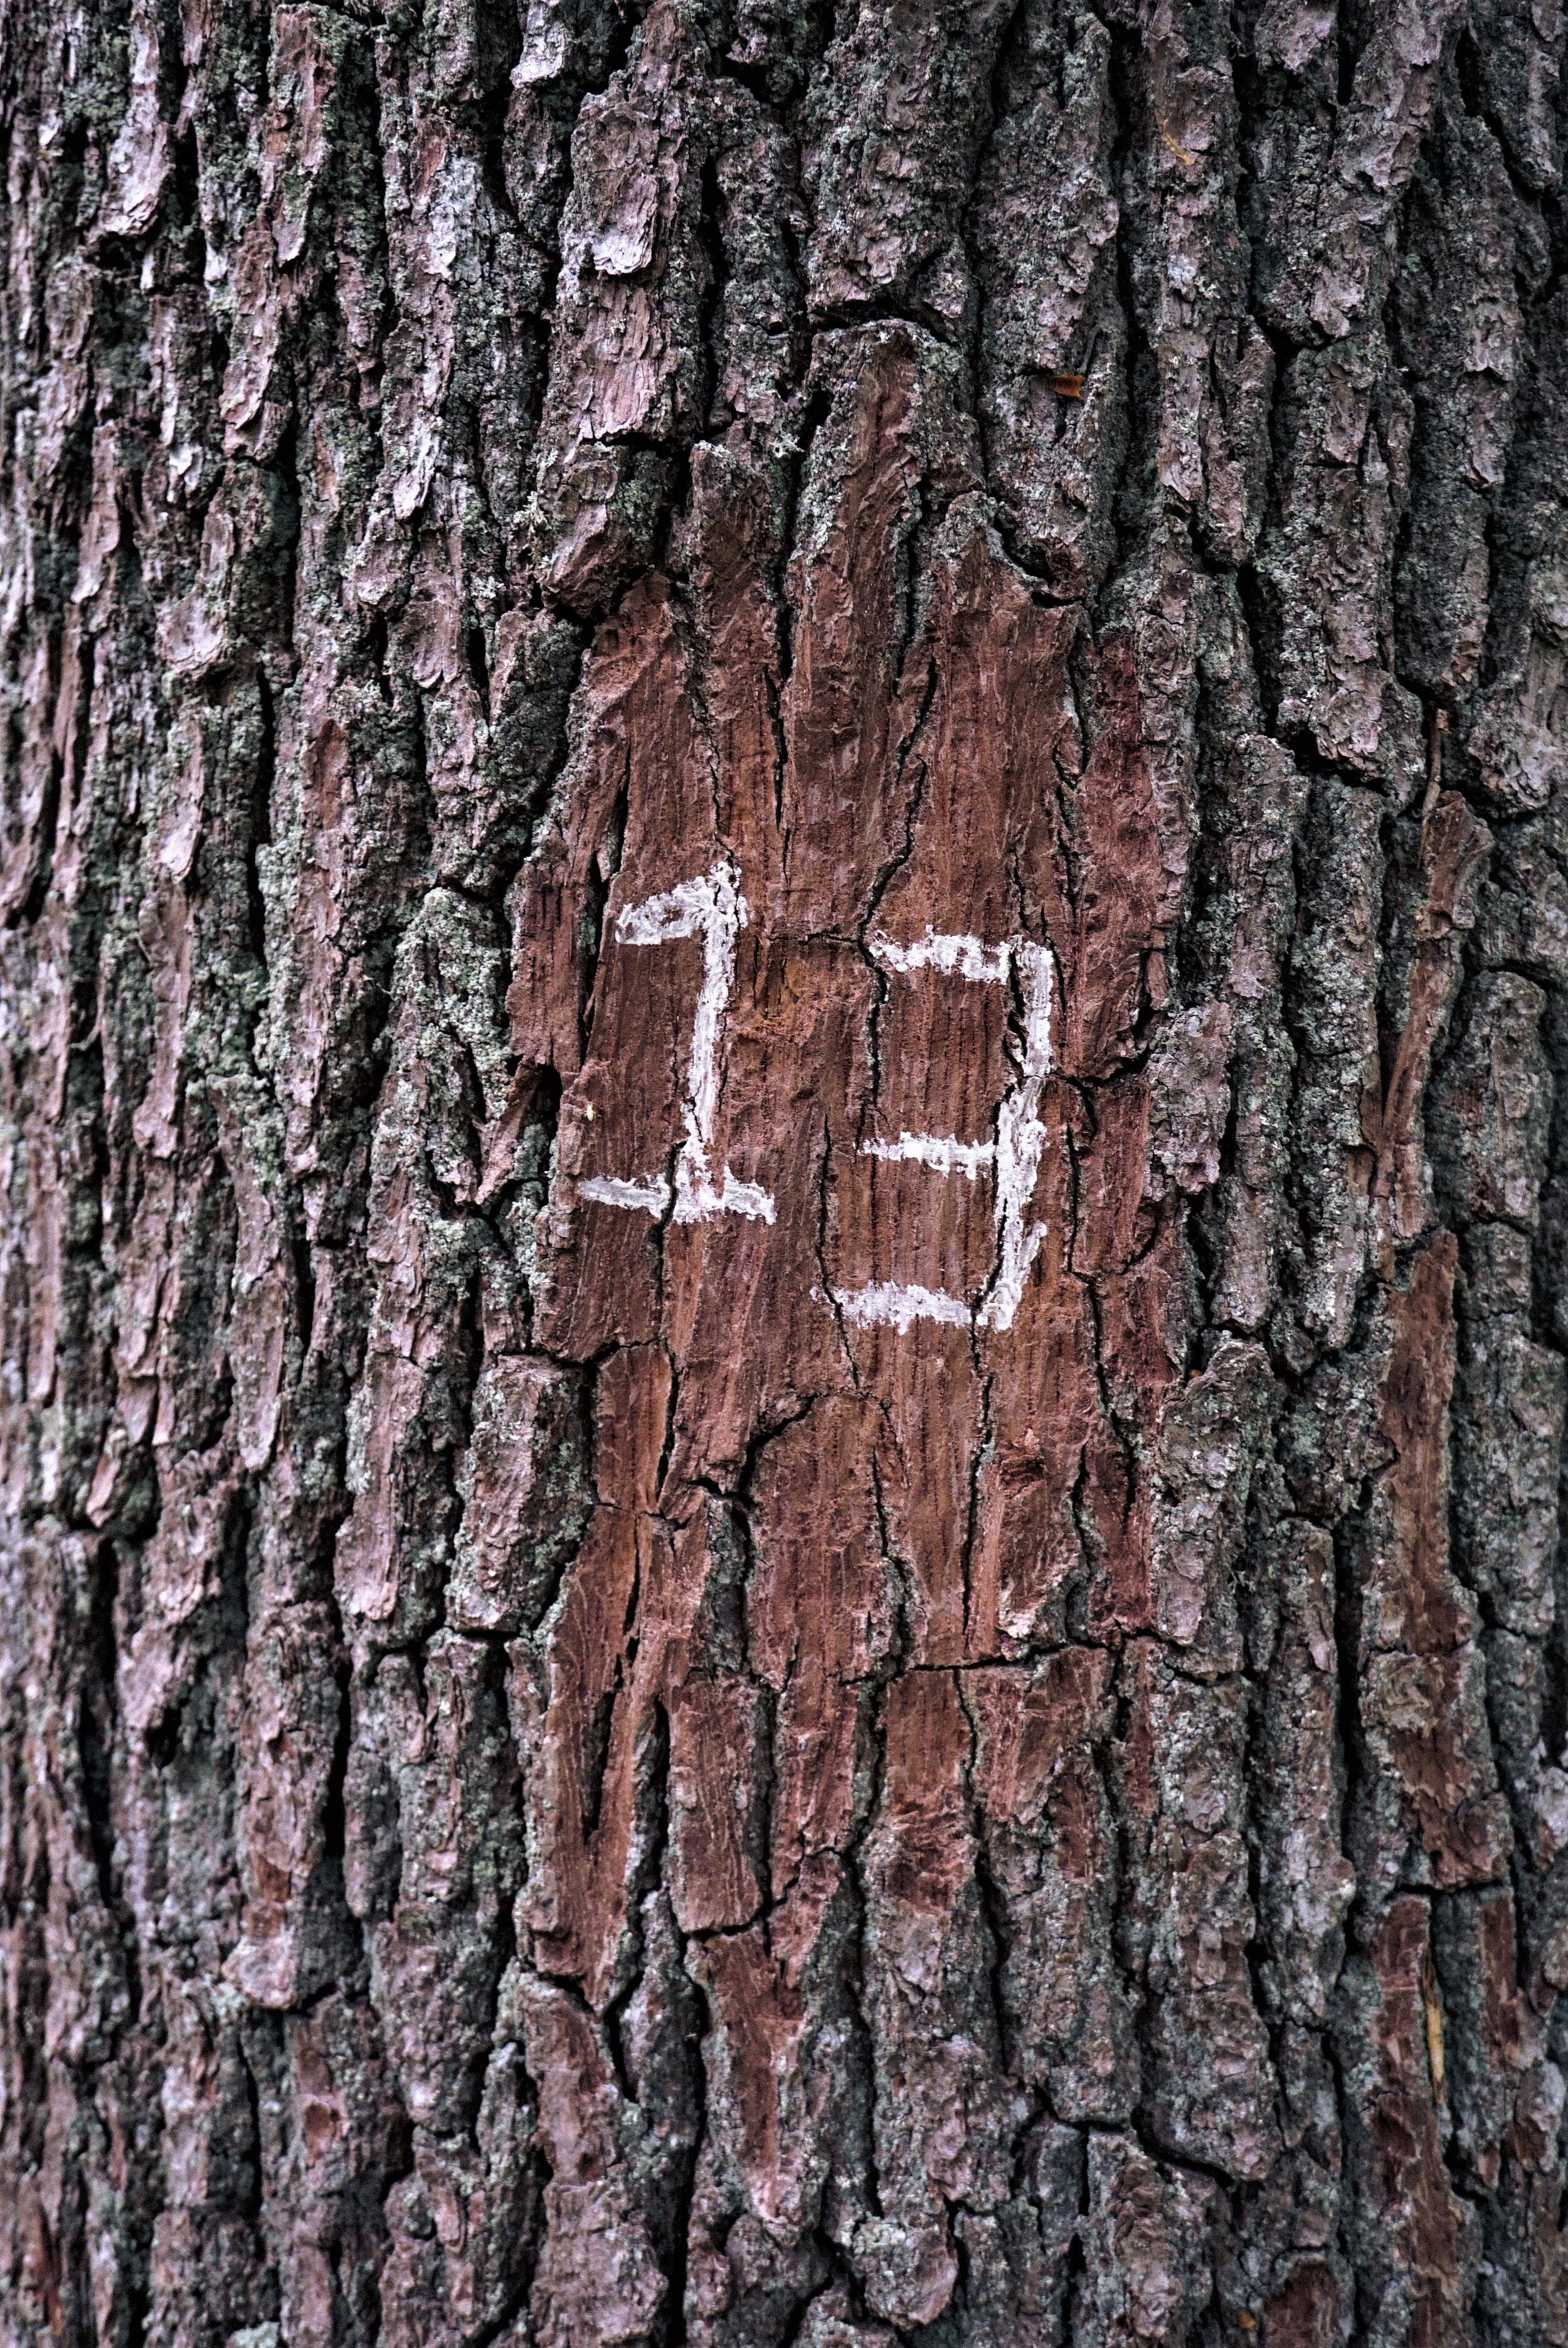 Unlucky number 13 carved into tree